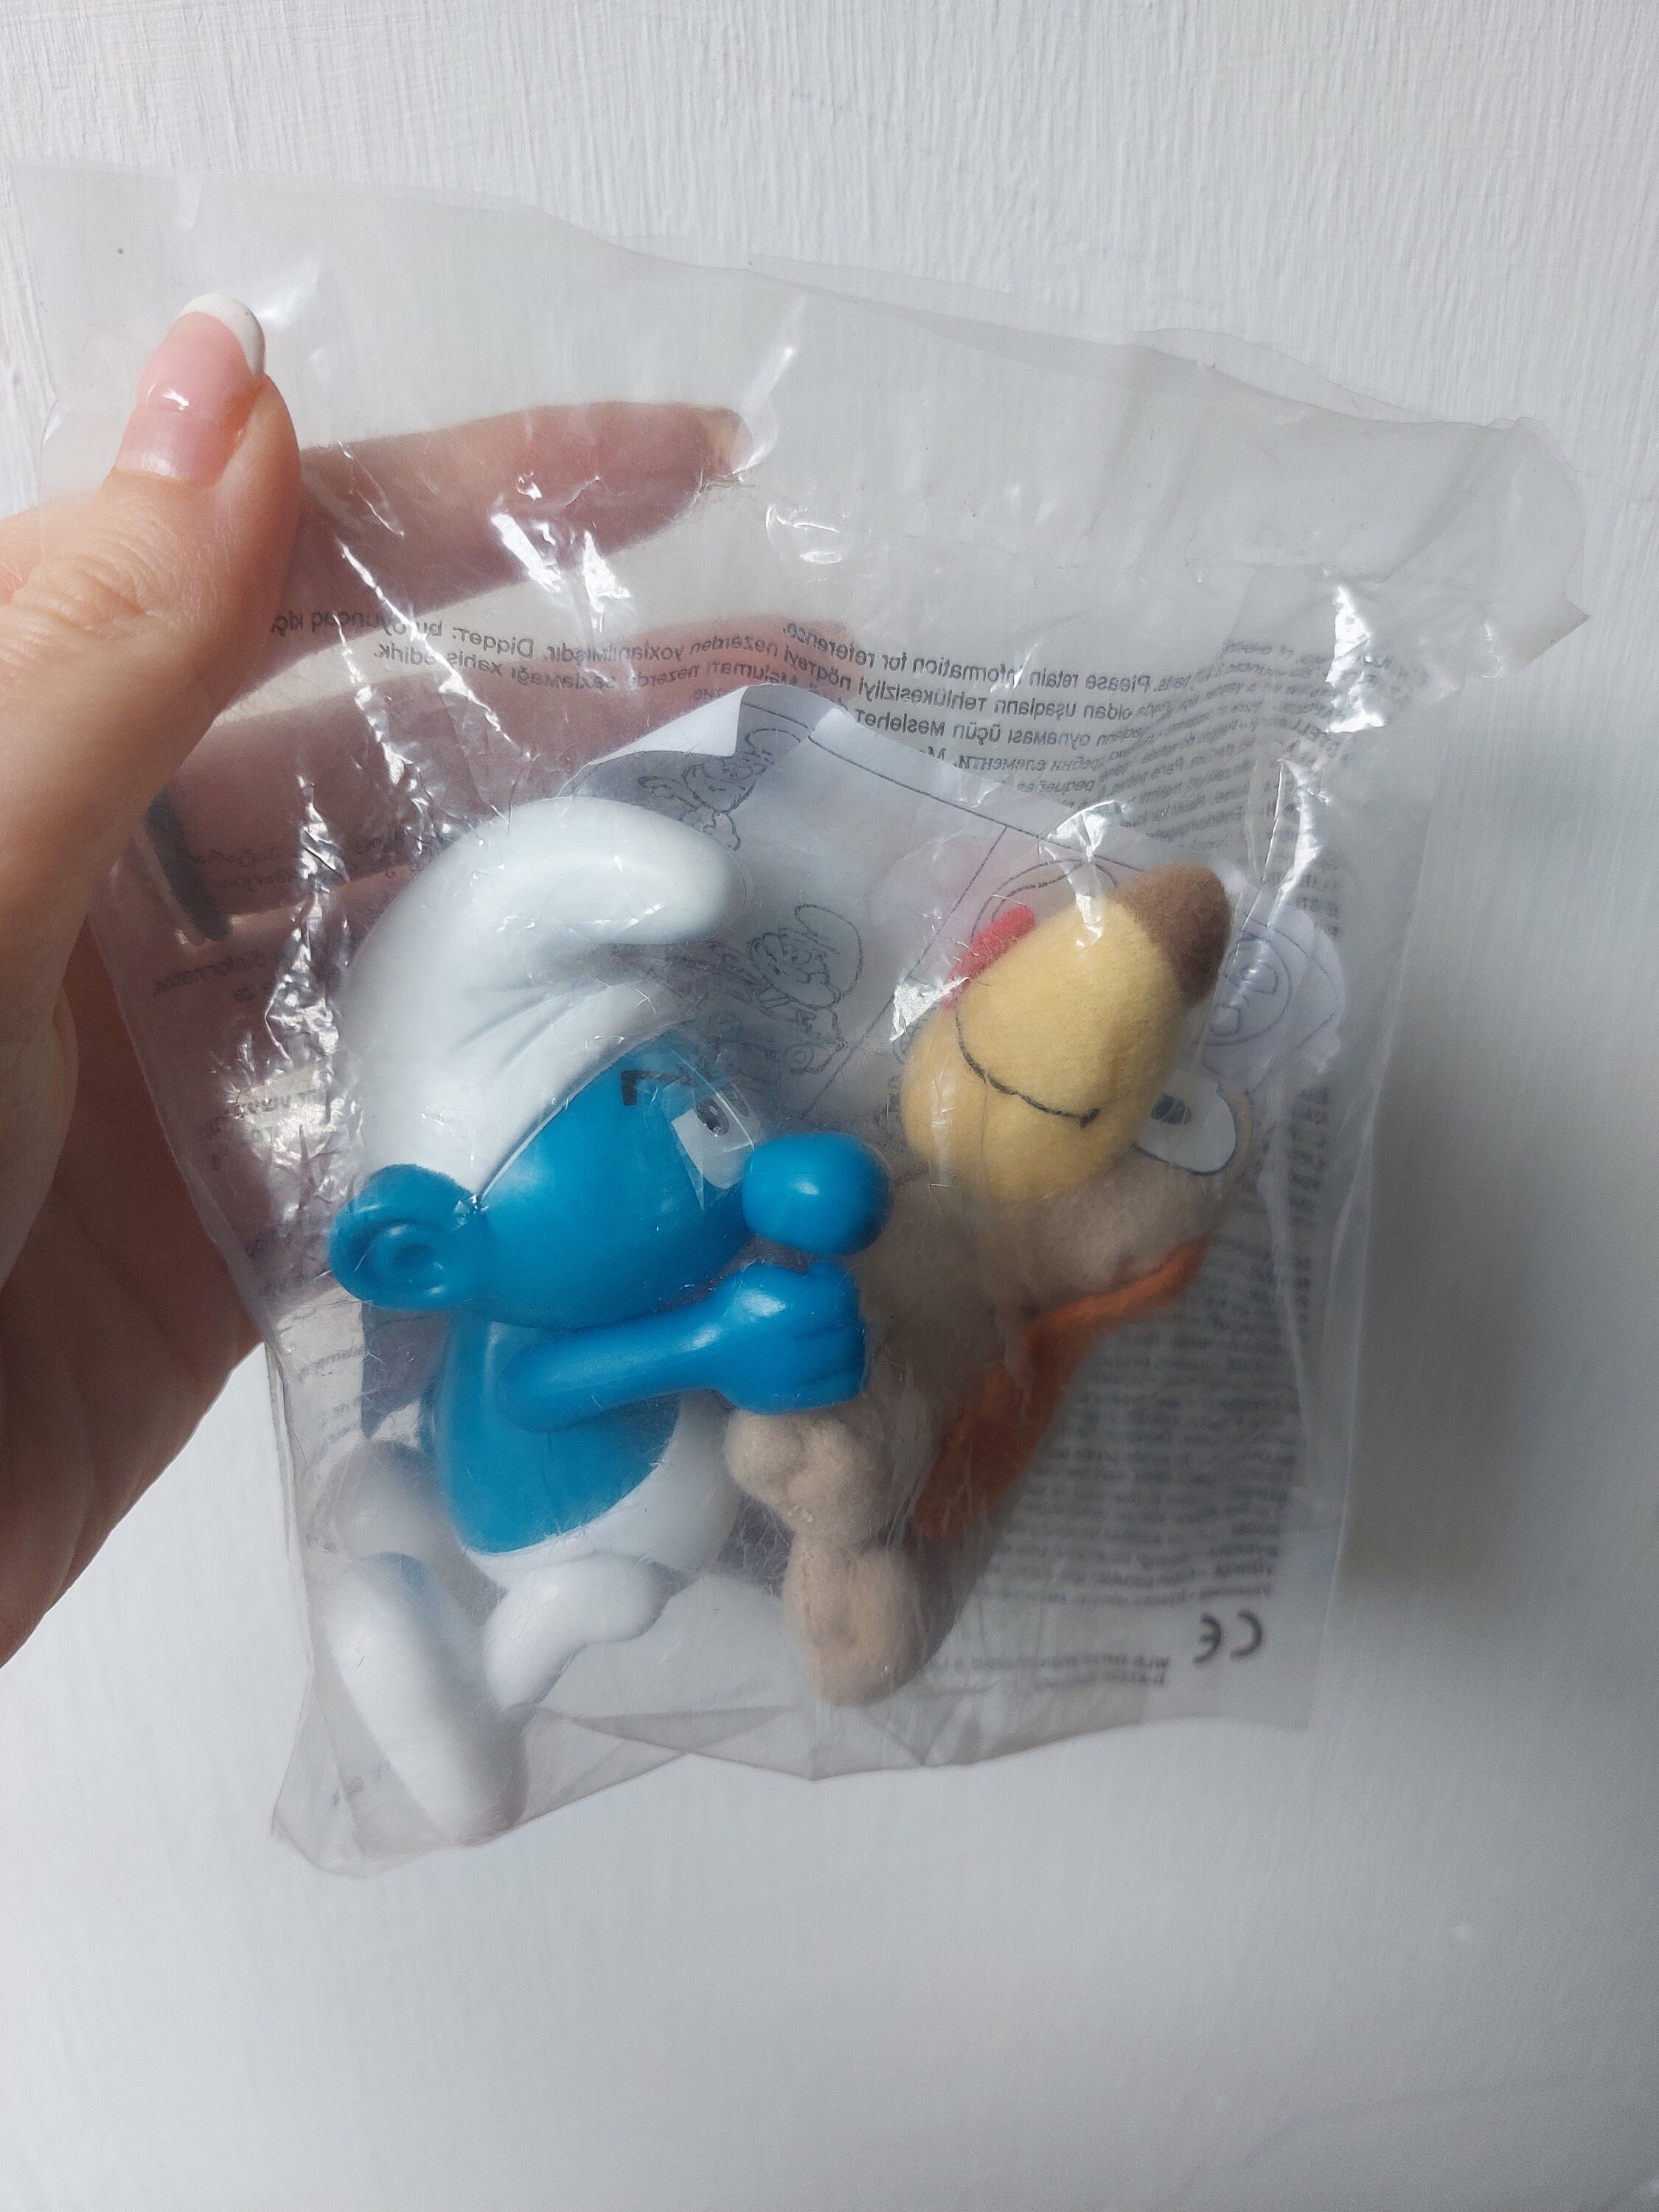 Cute and Safe smurfs toys, Perfect for Gifting 